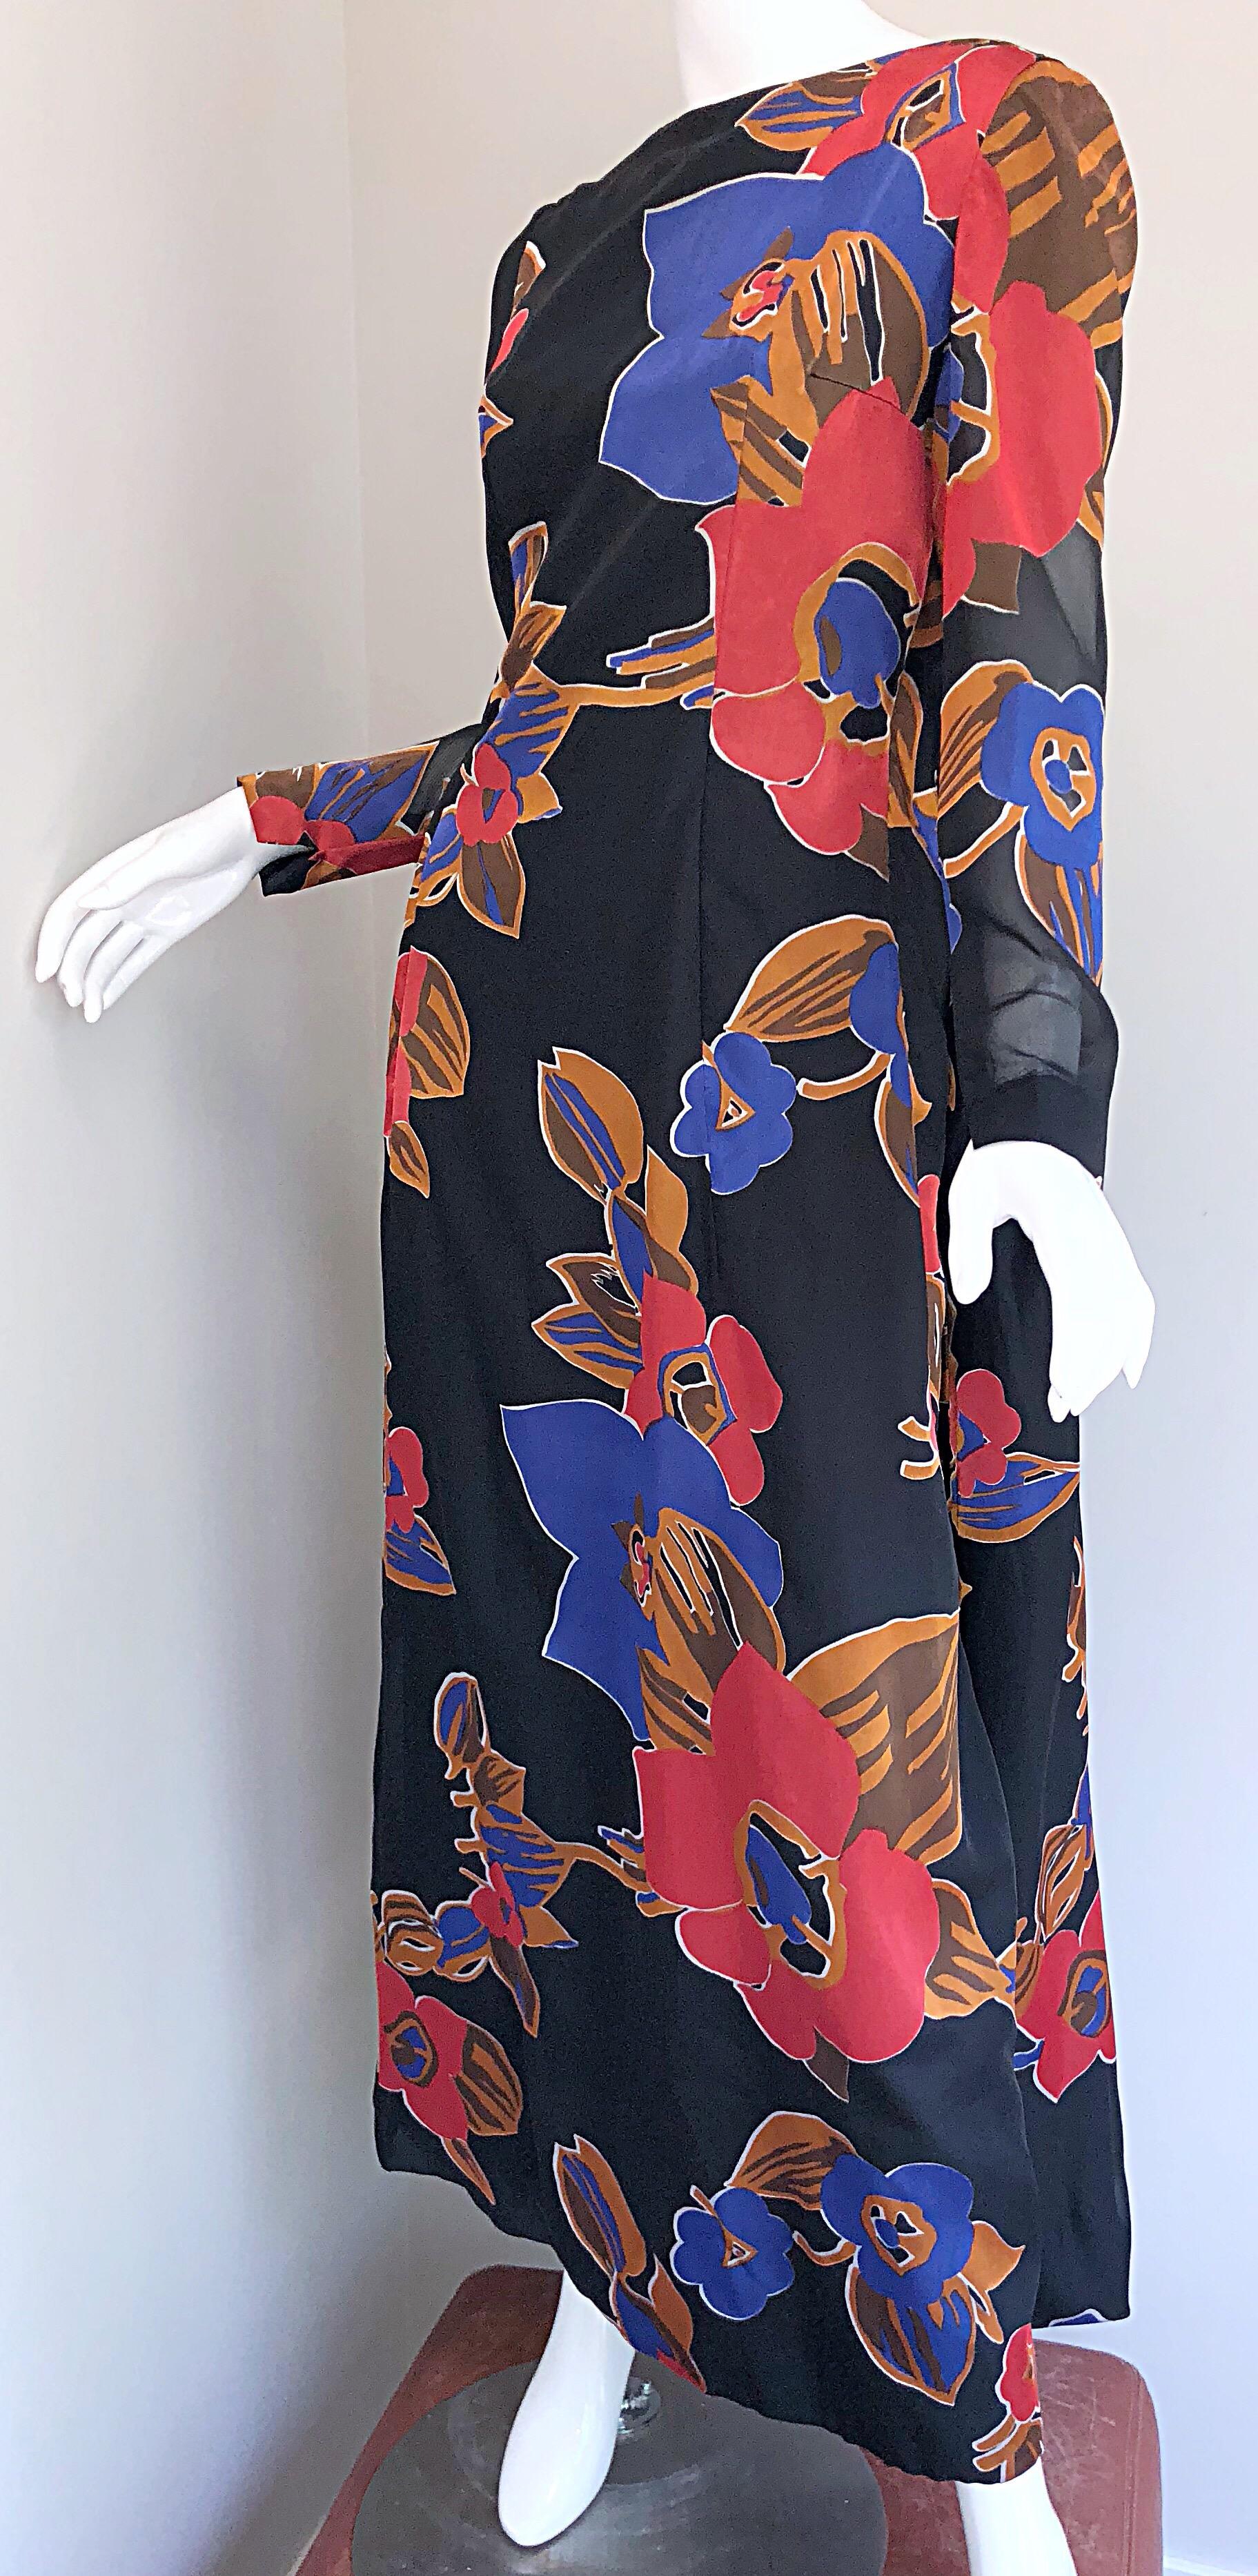 1960s John Boyle Bishop Black + Brown + Red Abstract Trained 60s Gown Maxi Dress For Sale 7